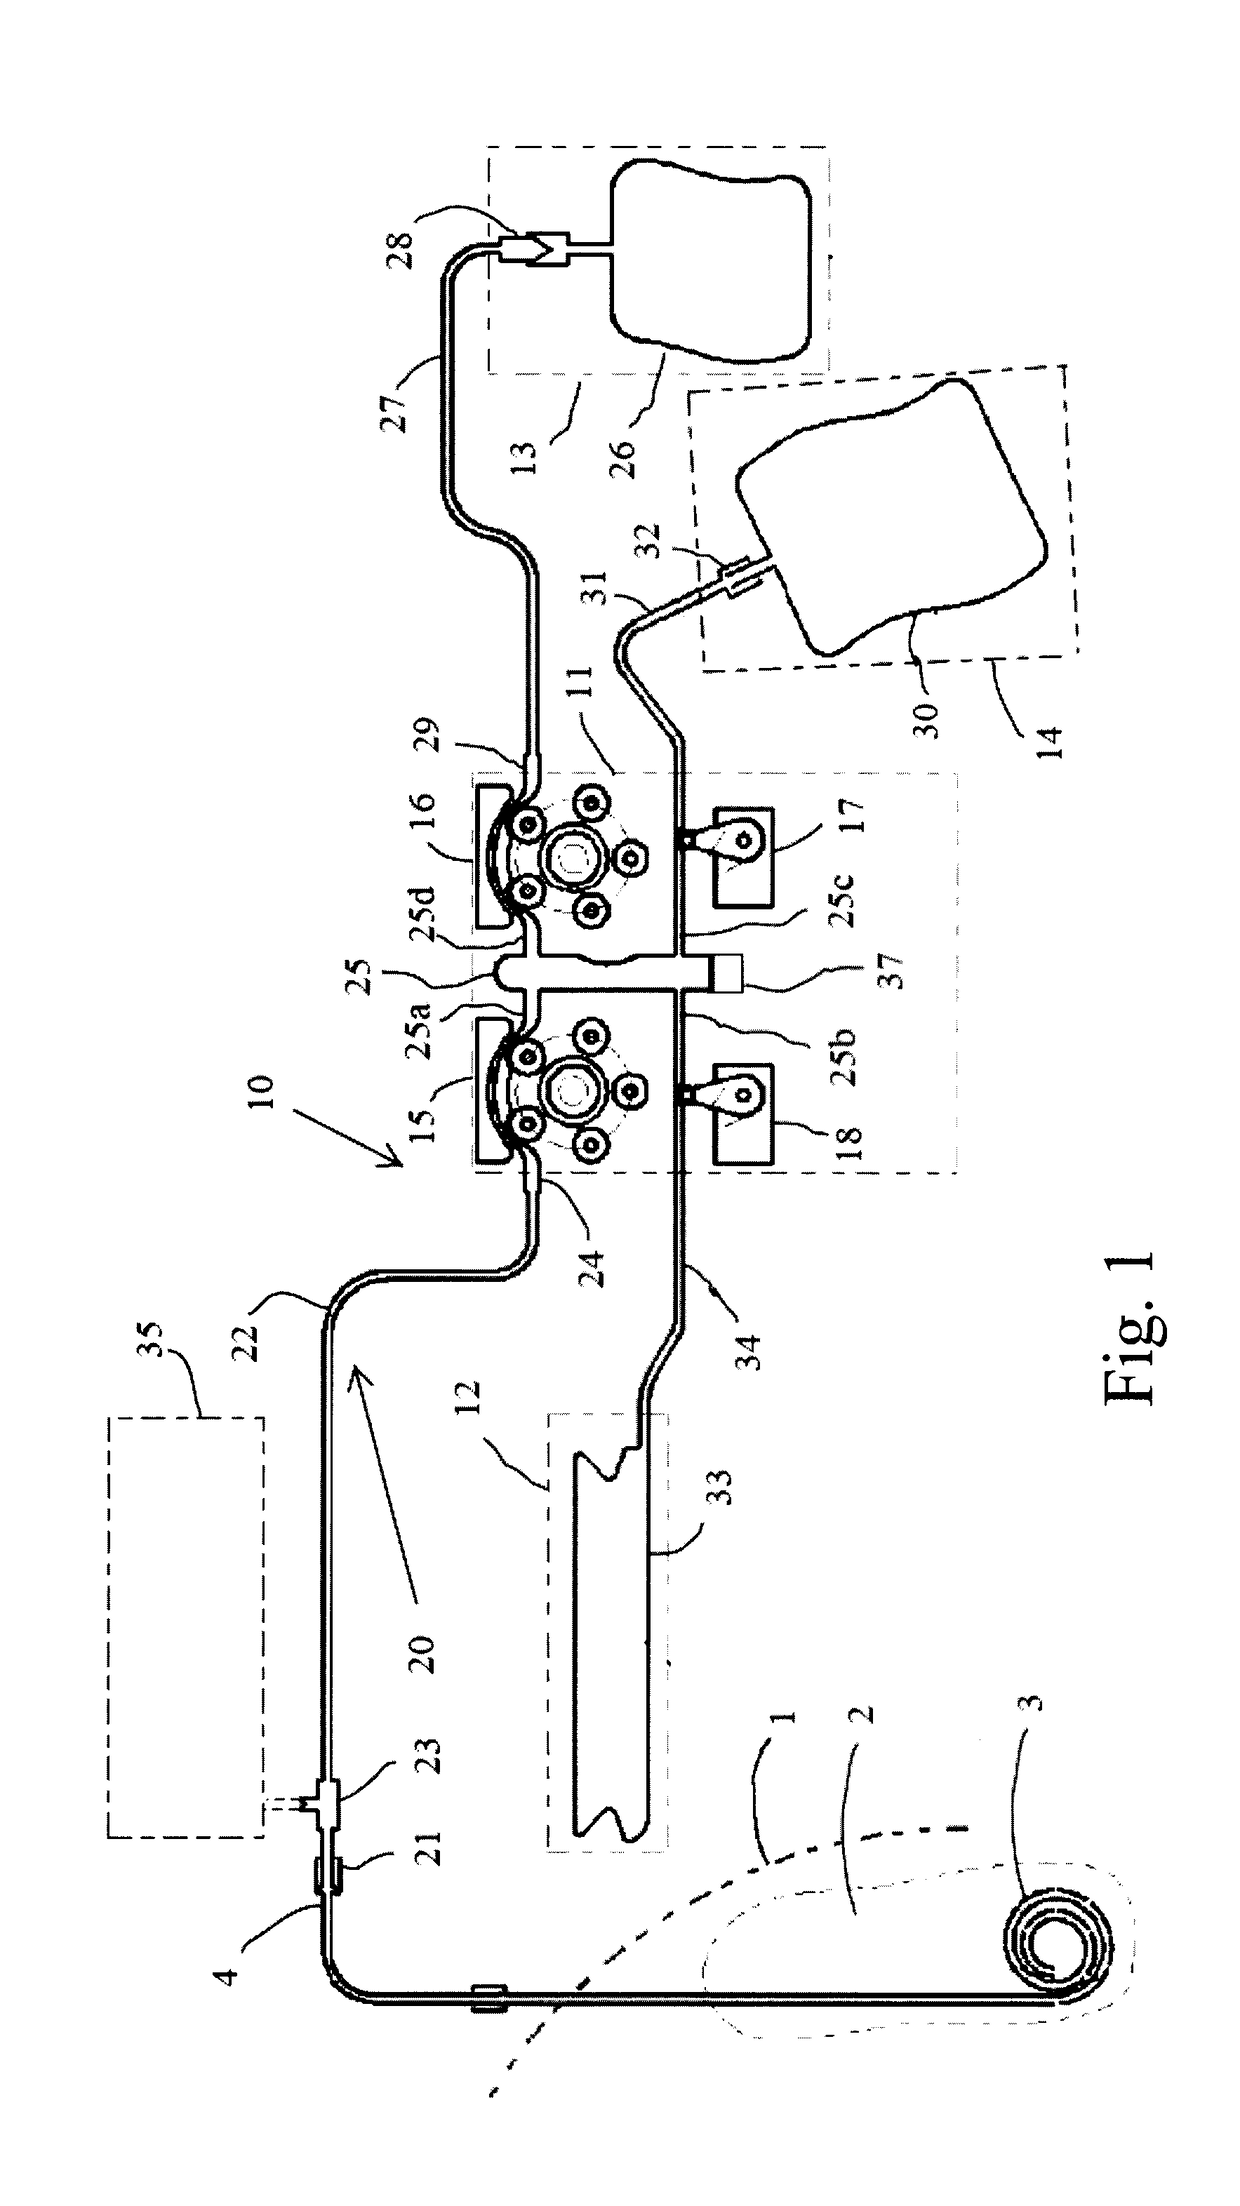 Method and apparatus for performing peritoneal ultrafiltration